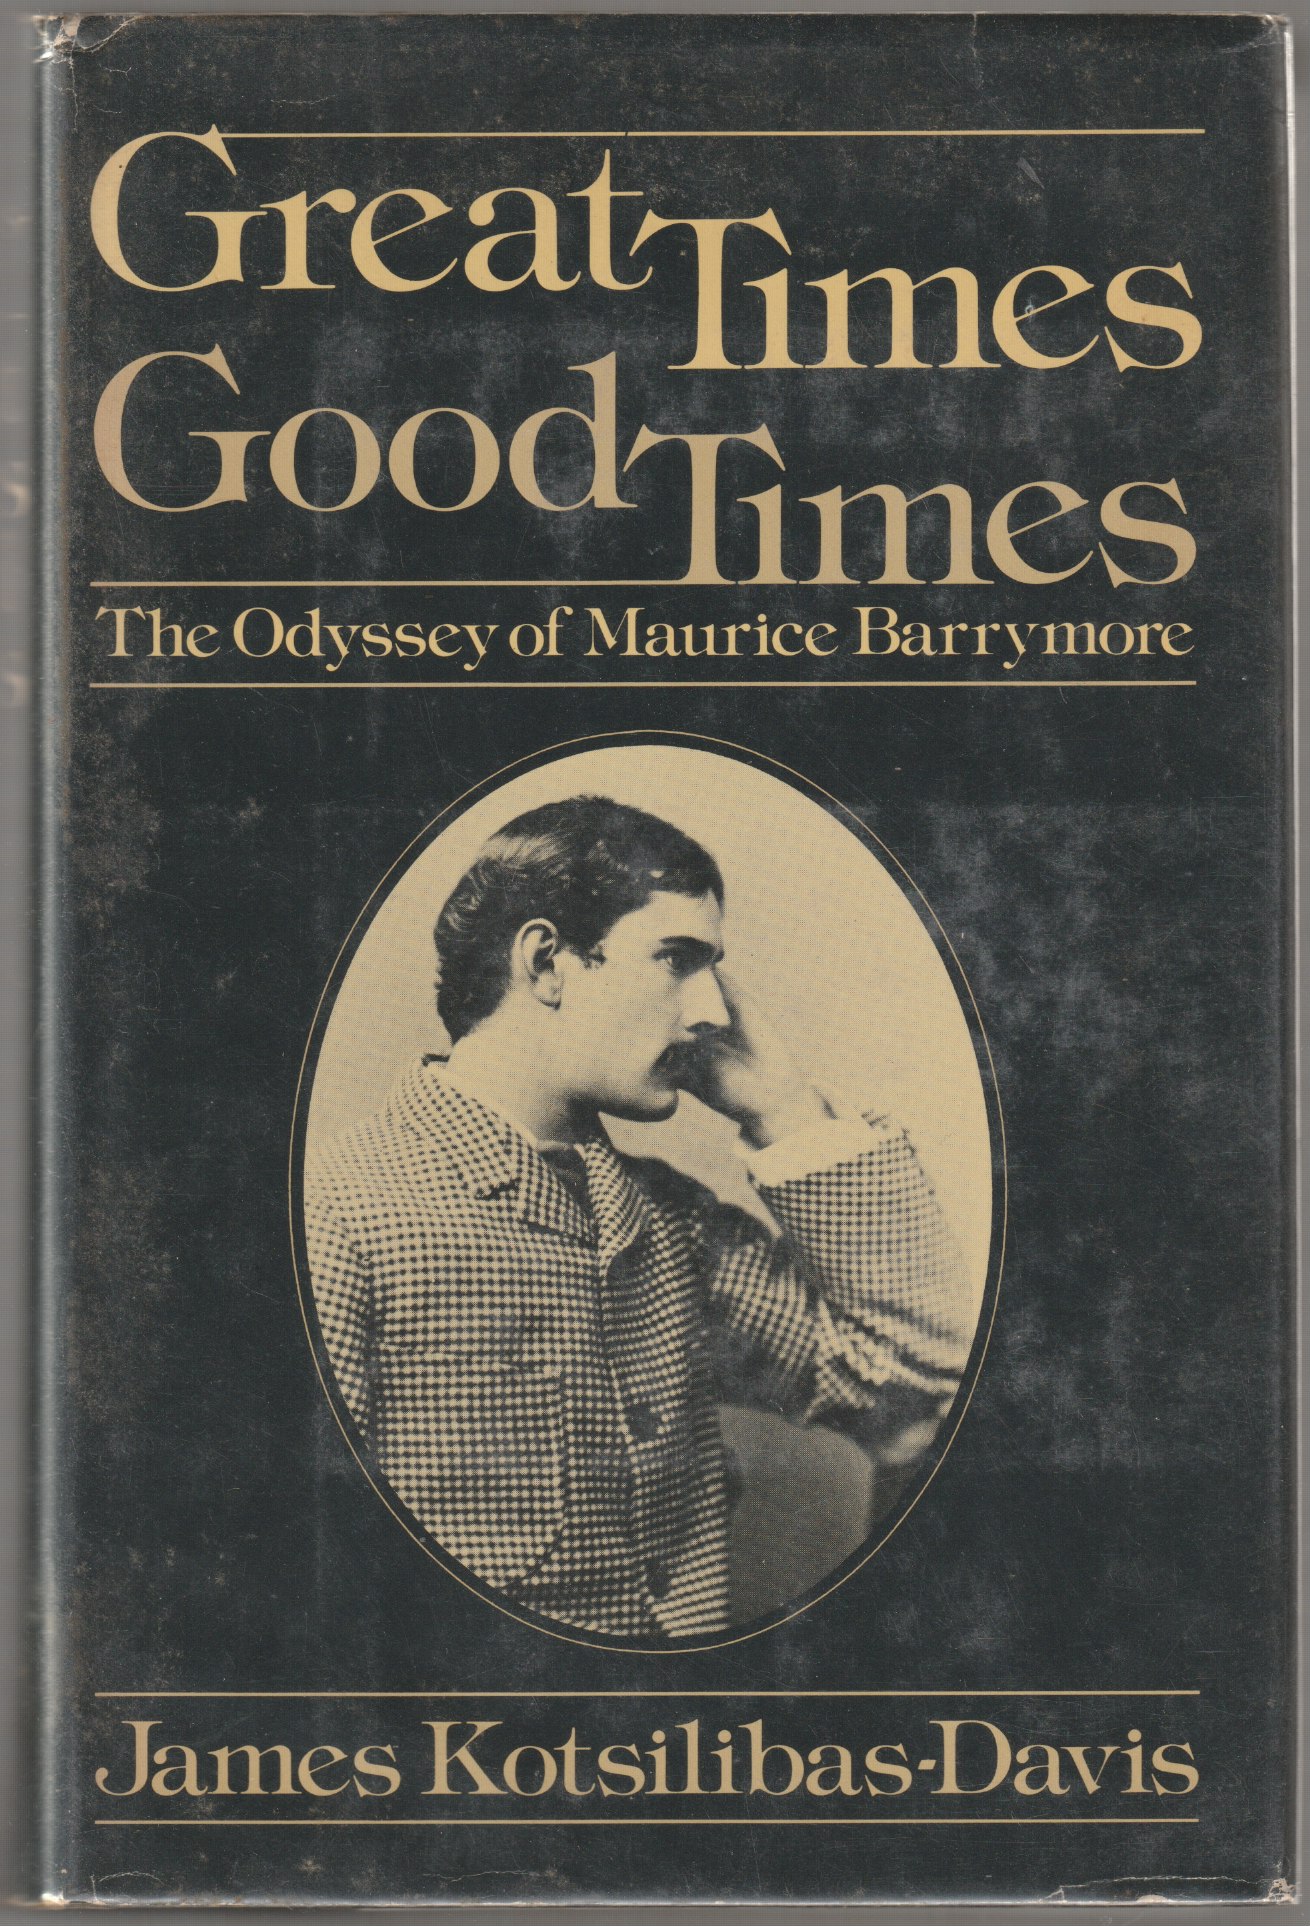 Great times, good times : the odyssey of Maurice Barrymore.